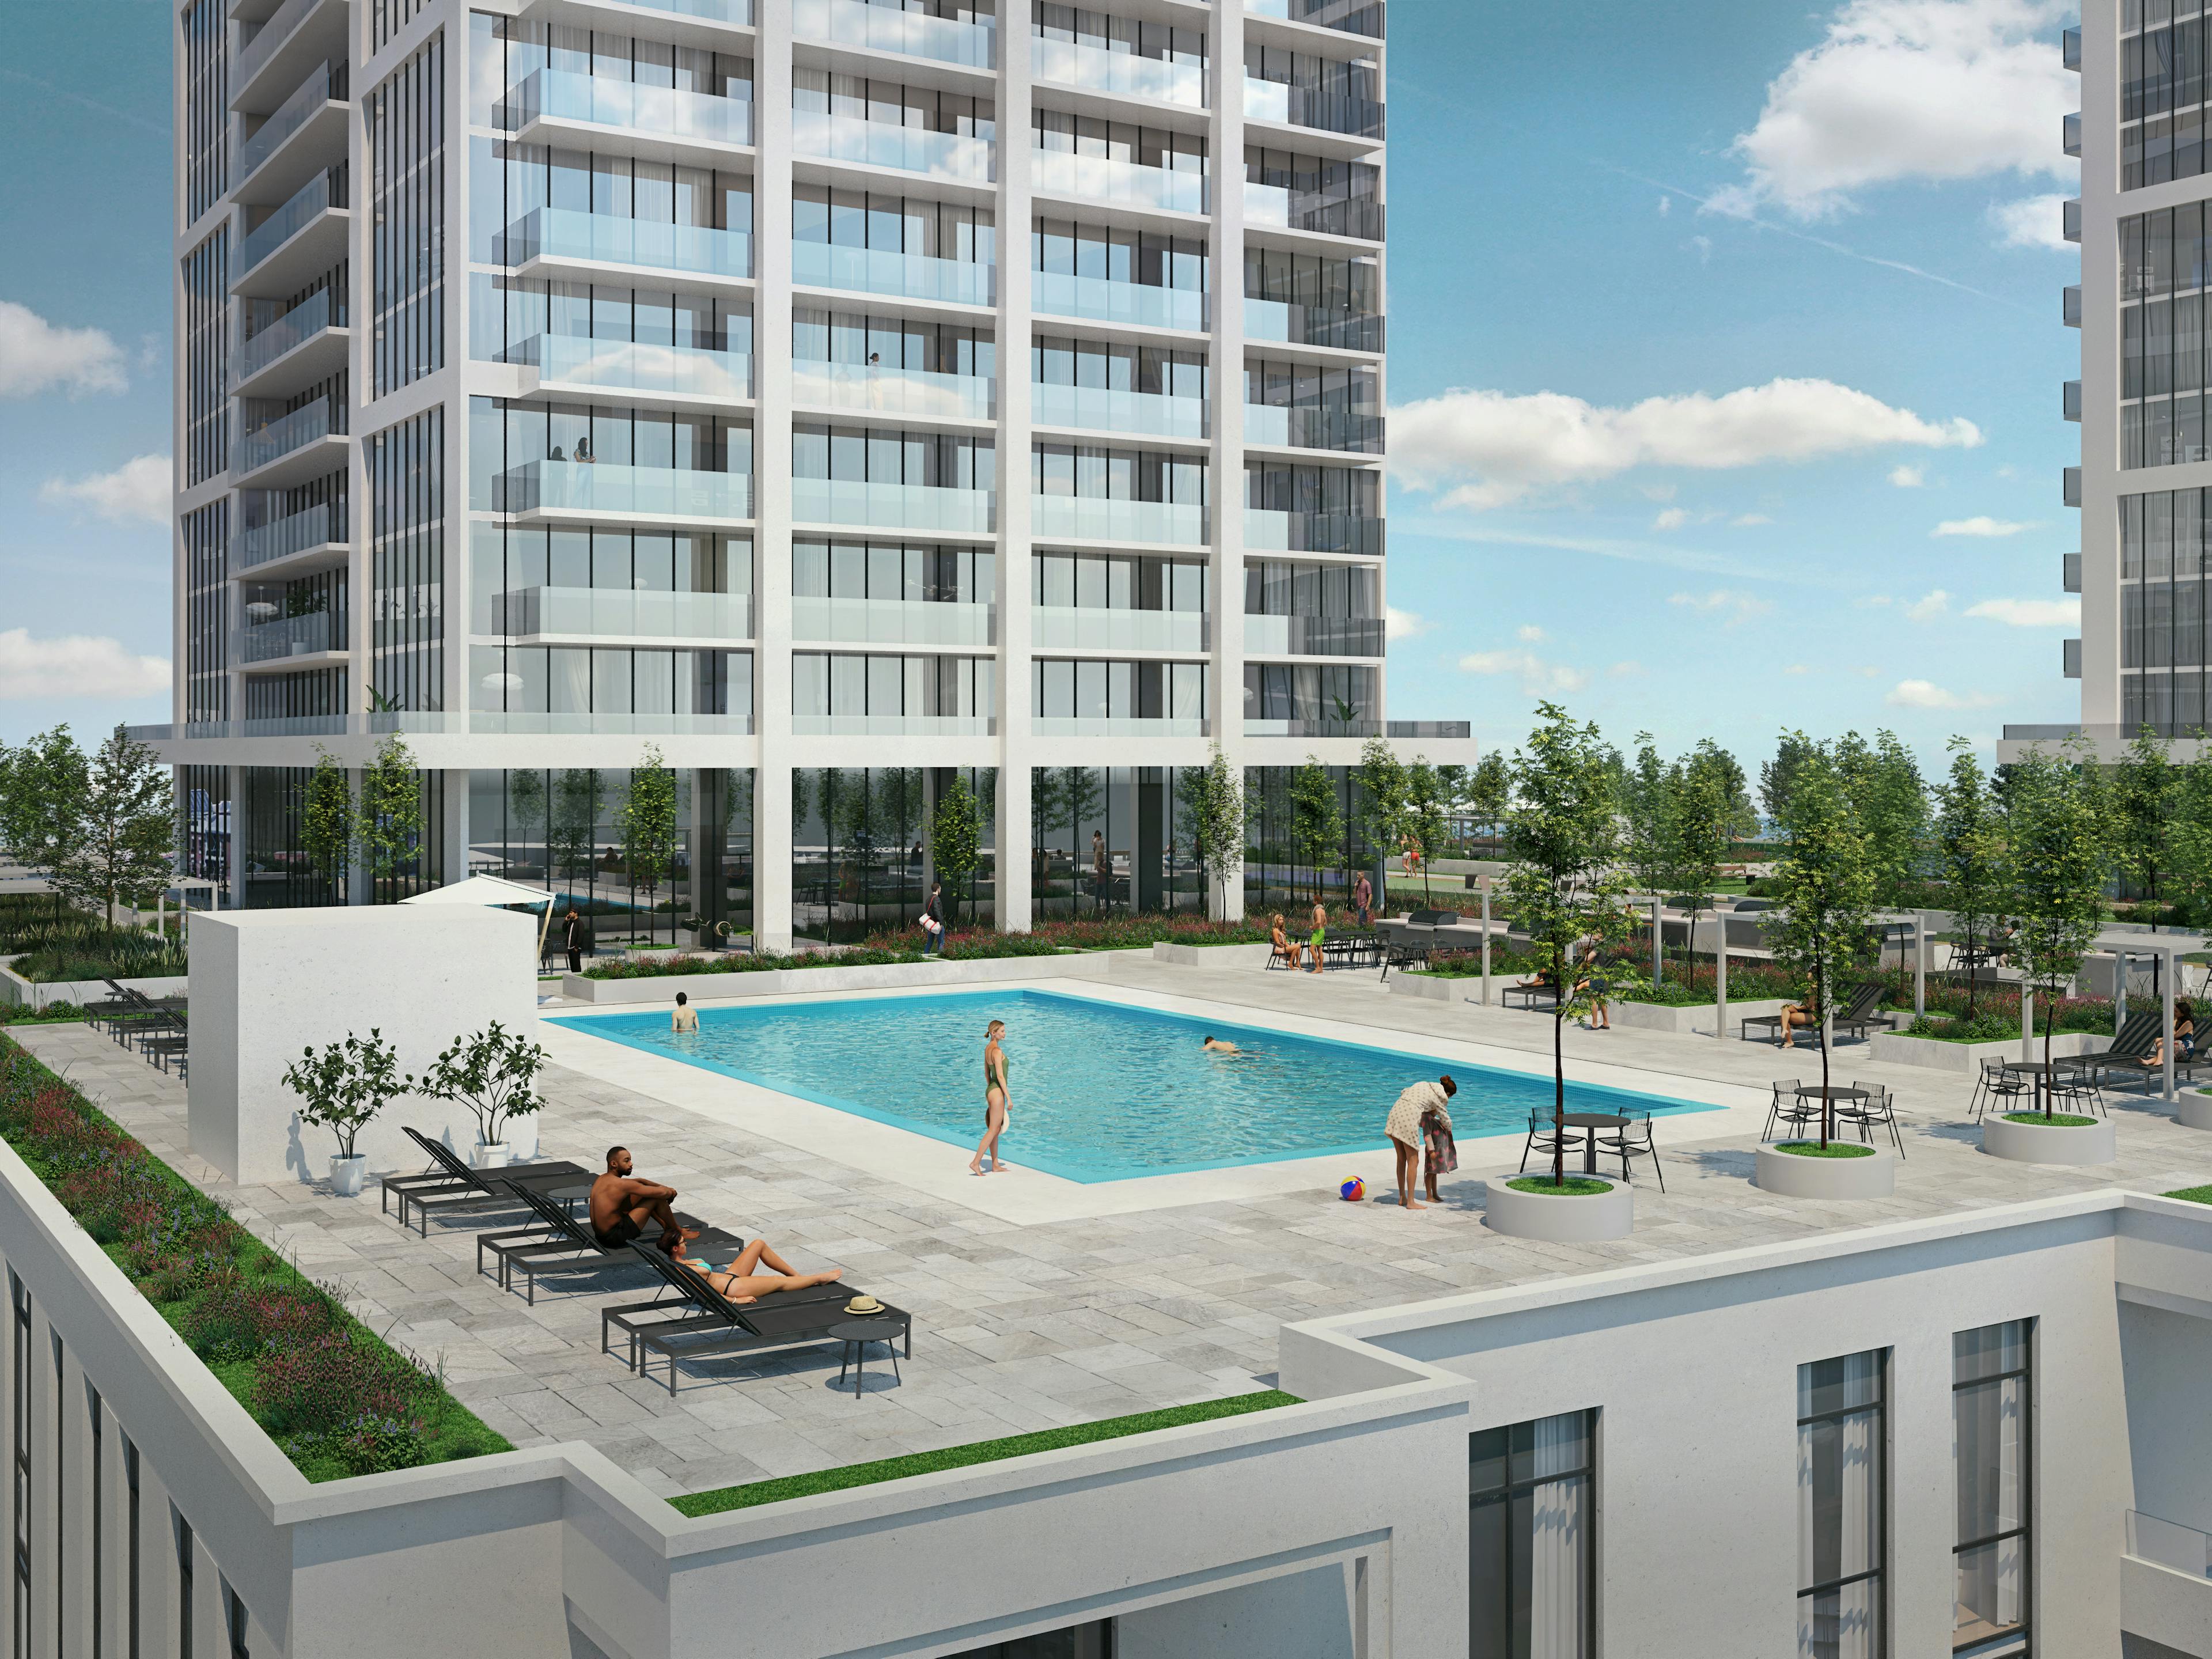 Evelyn Condos at Rise & Rose